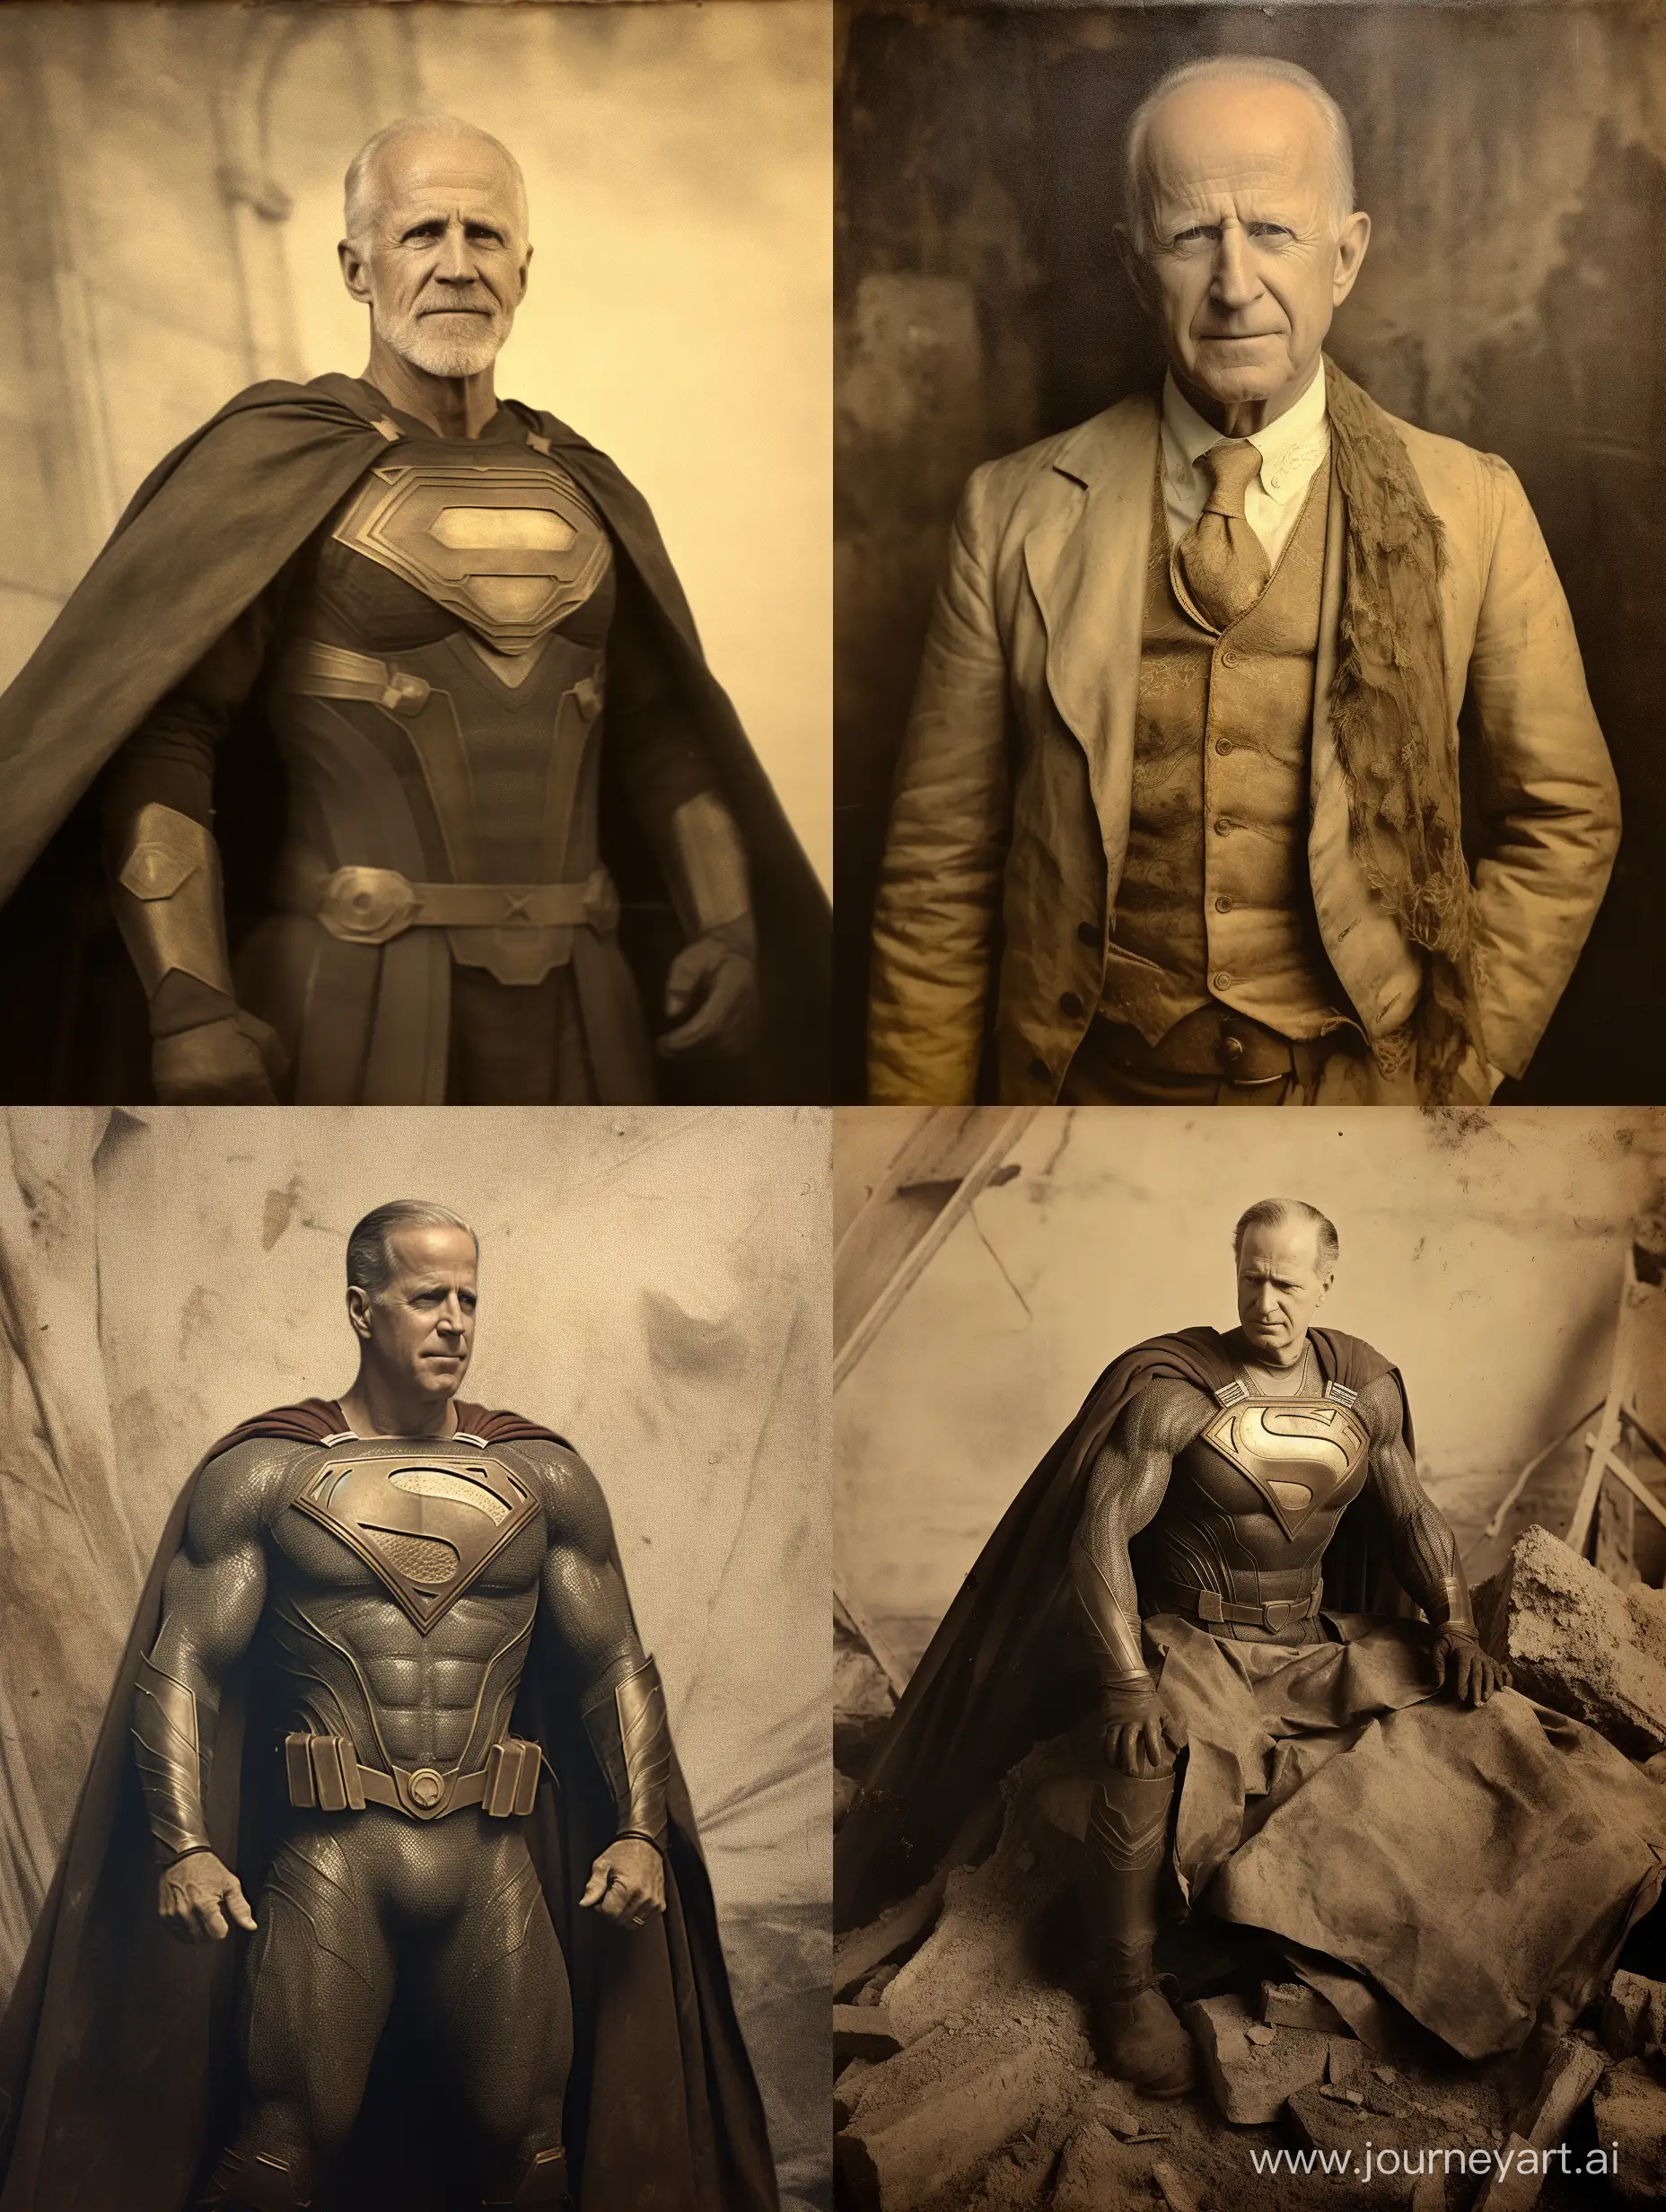 Historic archaeological photograph of Joe Baiden in Superman costume, sepia, photography aged and cracked.